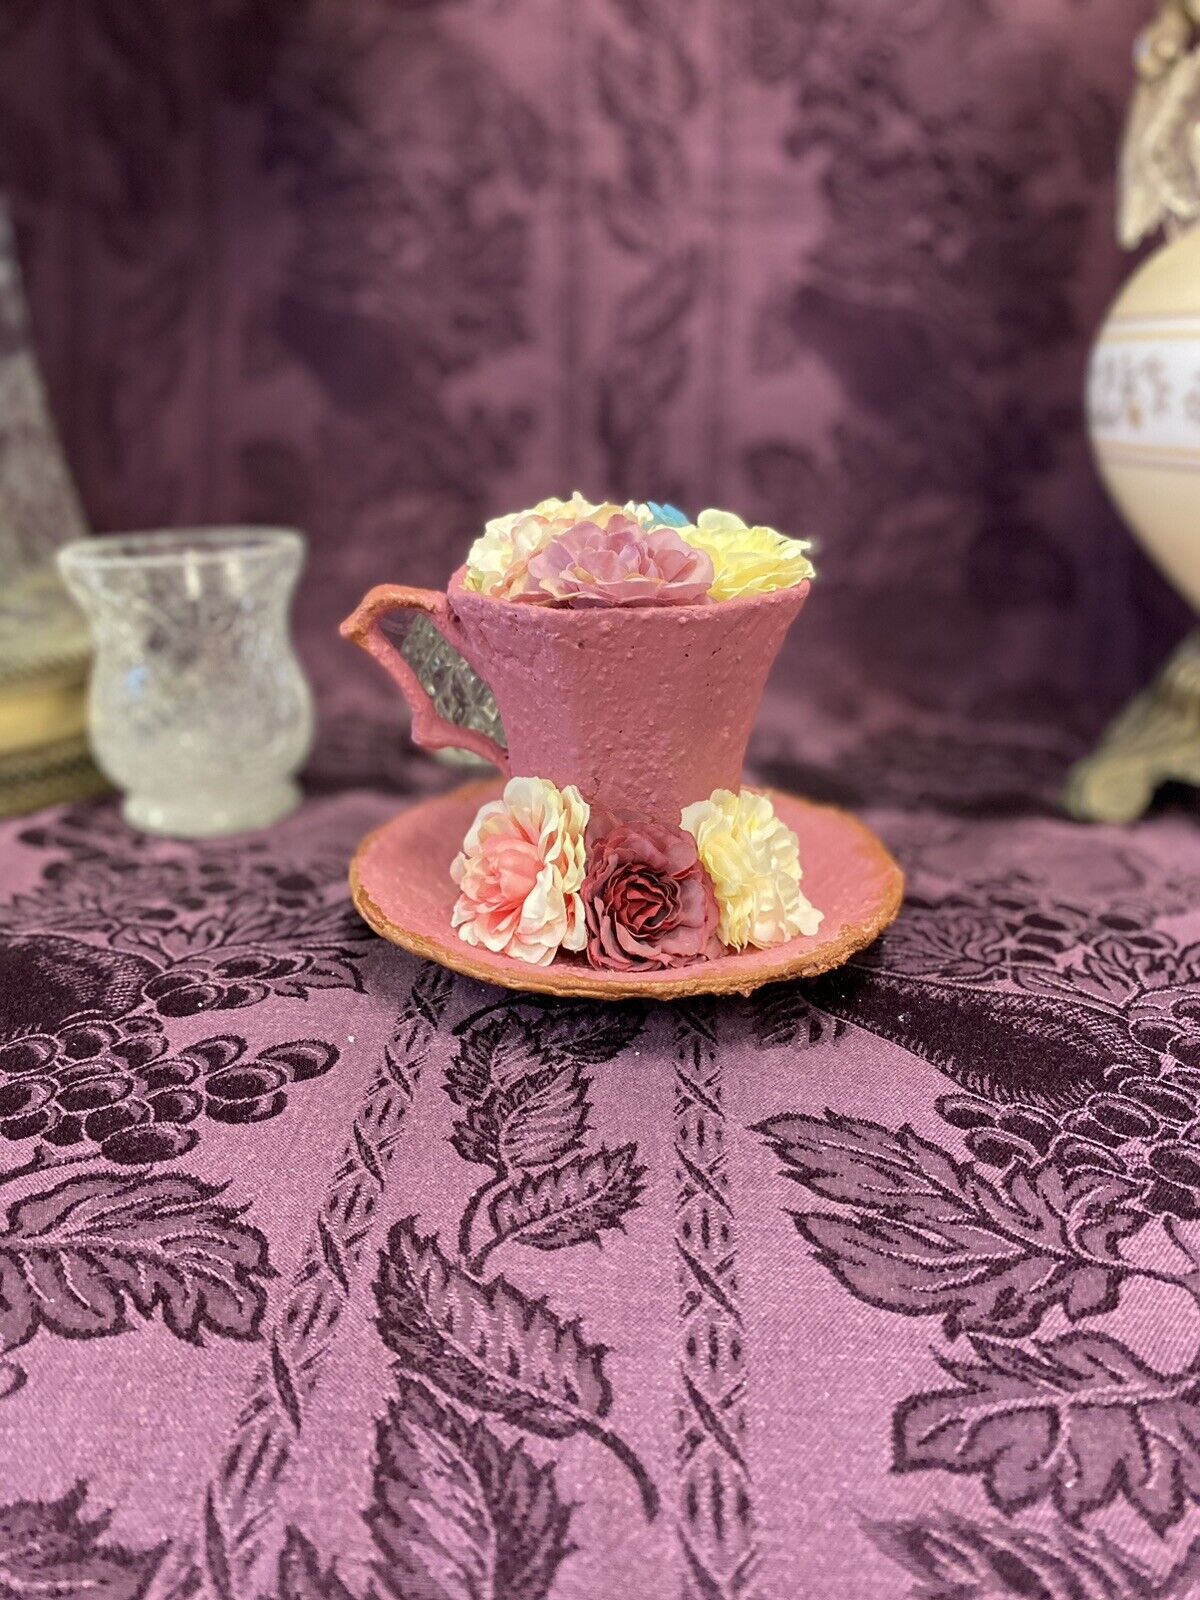 Handcrafted Flower Tea Coffee Cup Saucer Garden Collection Dusty Rose Pink Tan Decorative Tea Cup & Saucer Stylin’ Spirit   